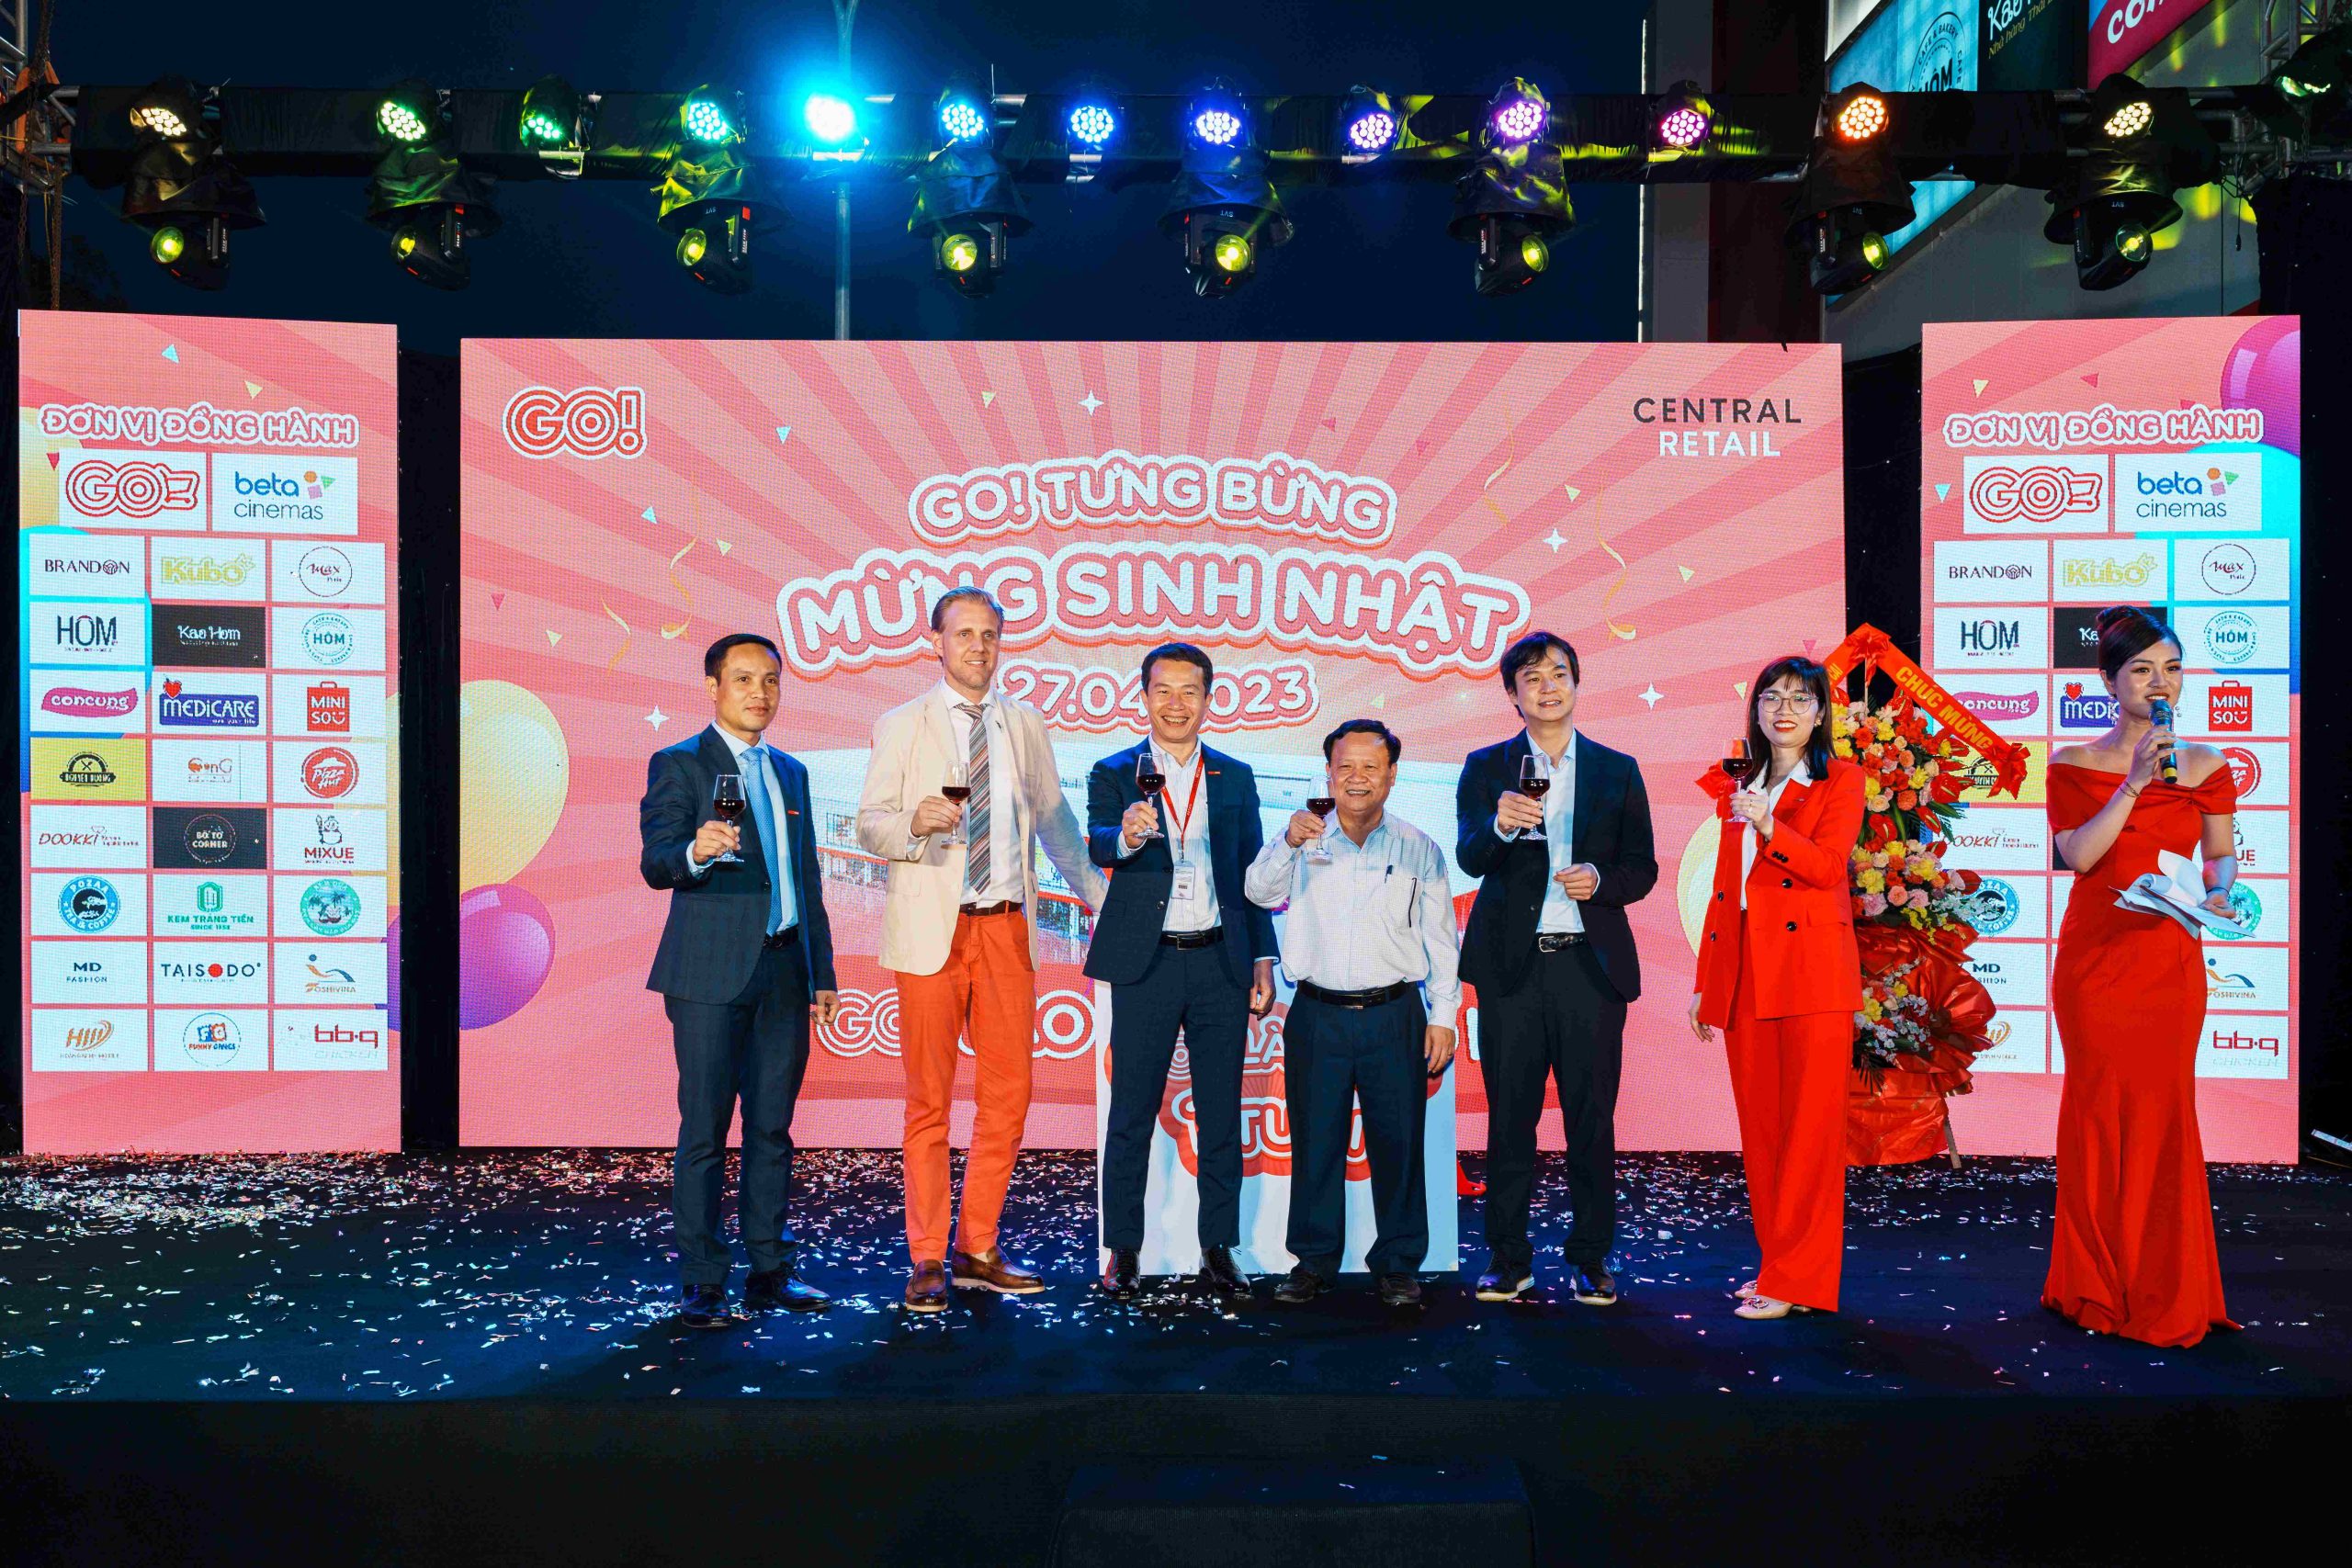 Central Retail in Vietnam is excited to celebrate the 1st anniversary of GO! Lao Cai